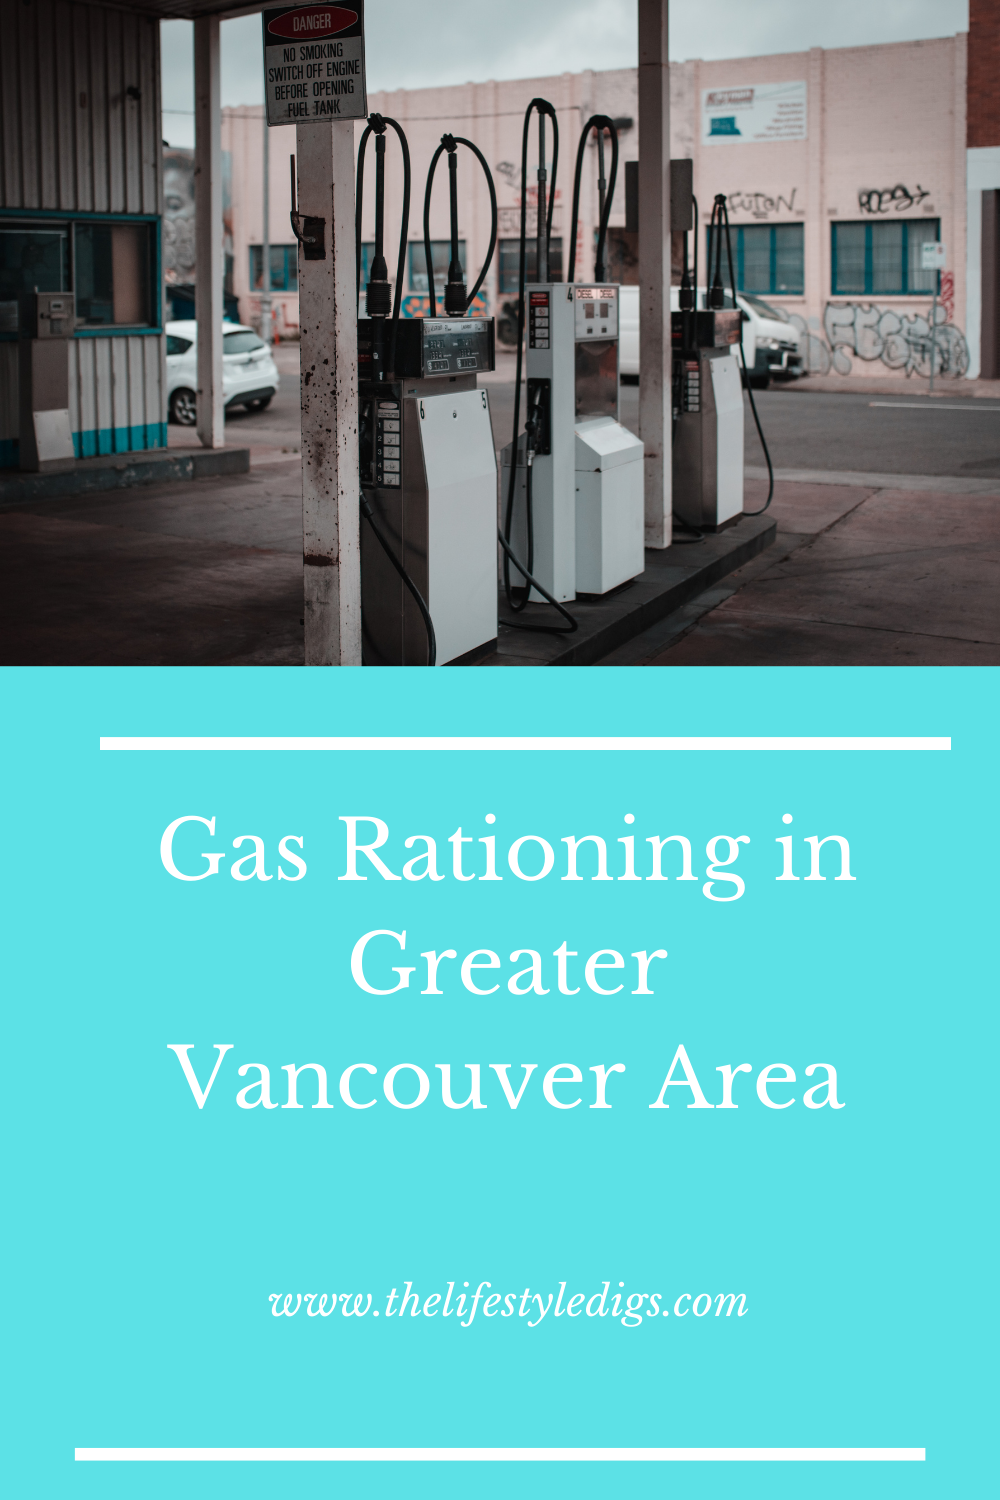 Gas Rationing in Greater Vancouver Area